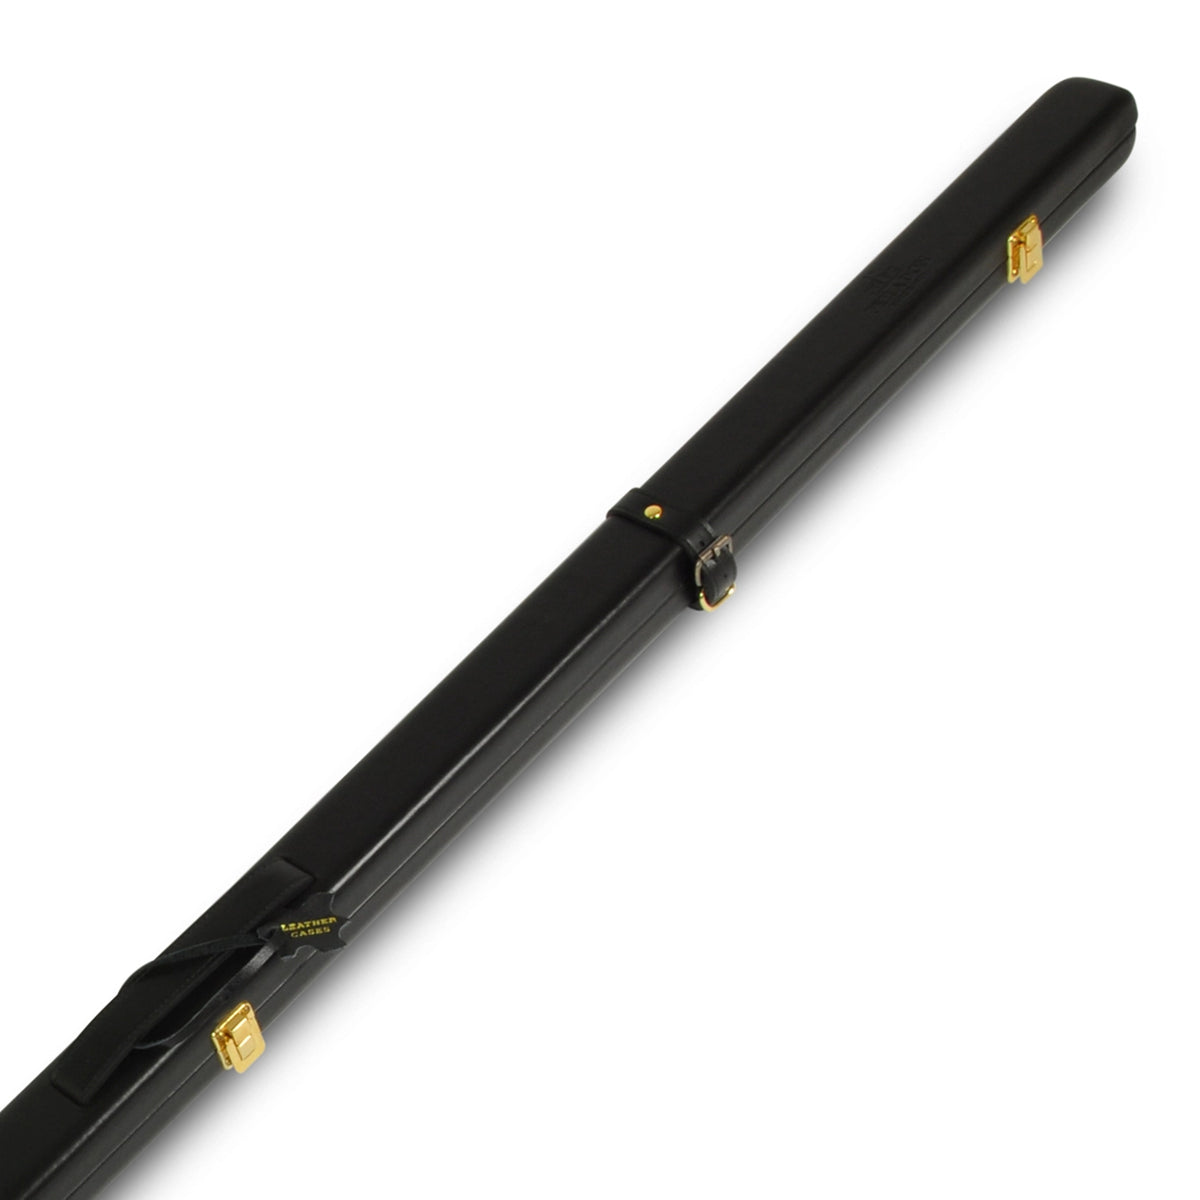 Peradon Thin Leather One Piece Cue Case Black. Full lengh view